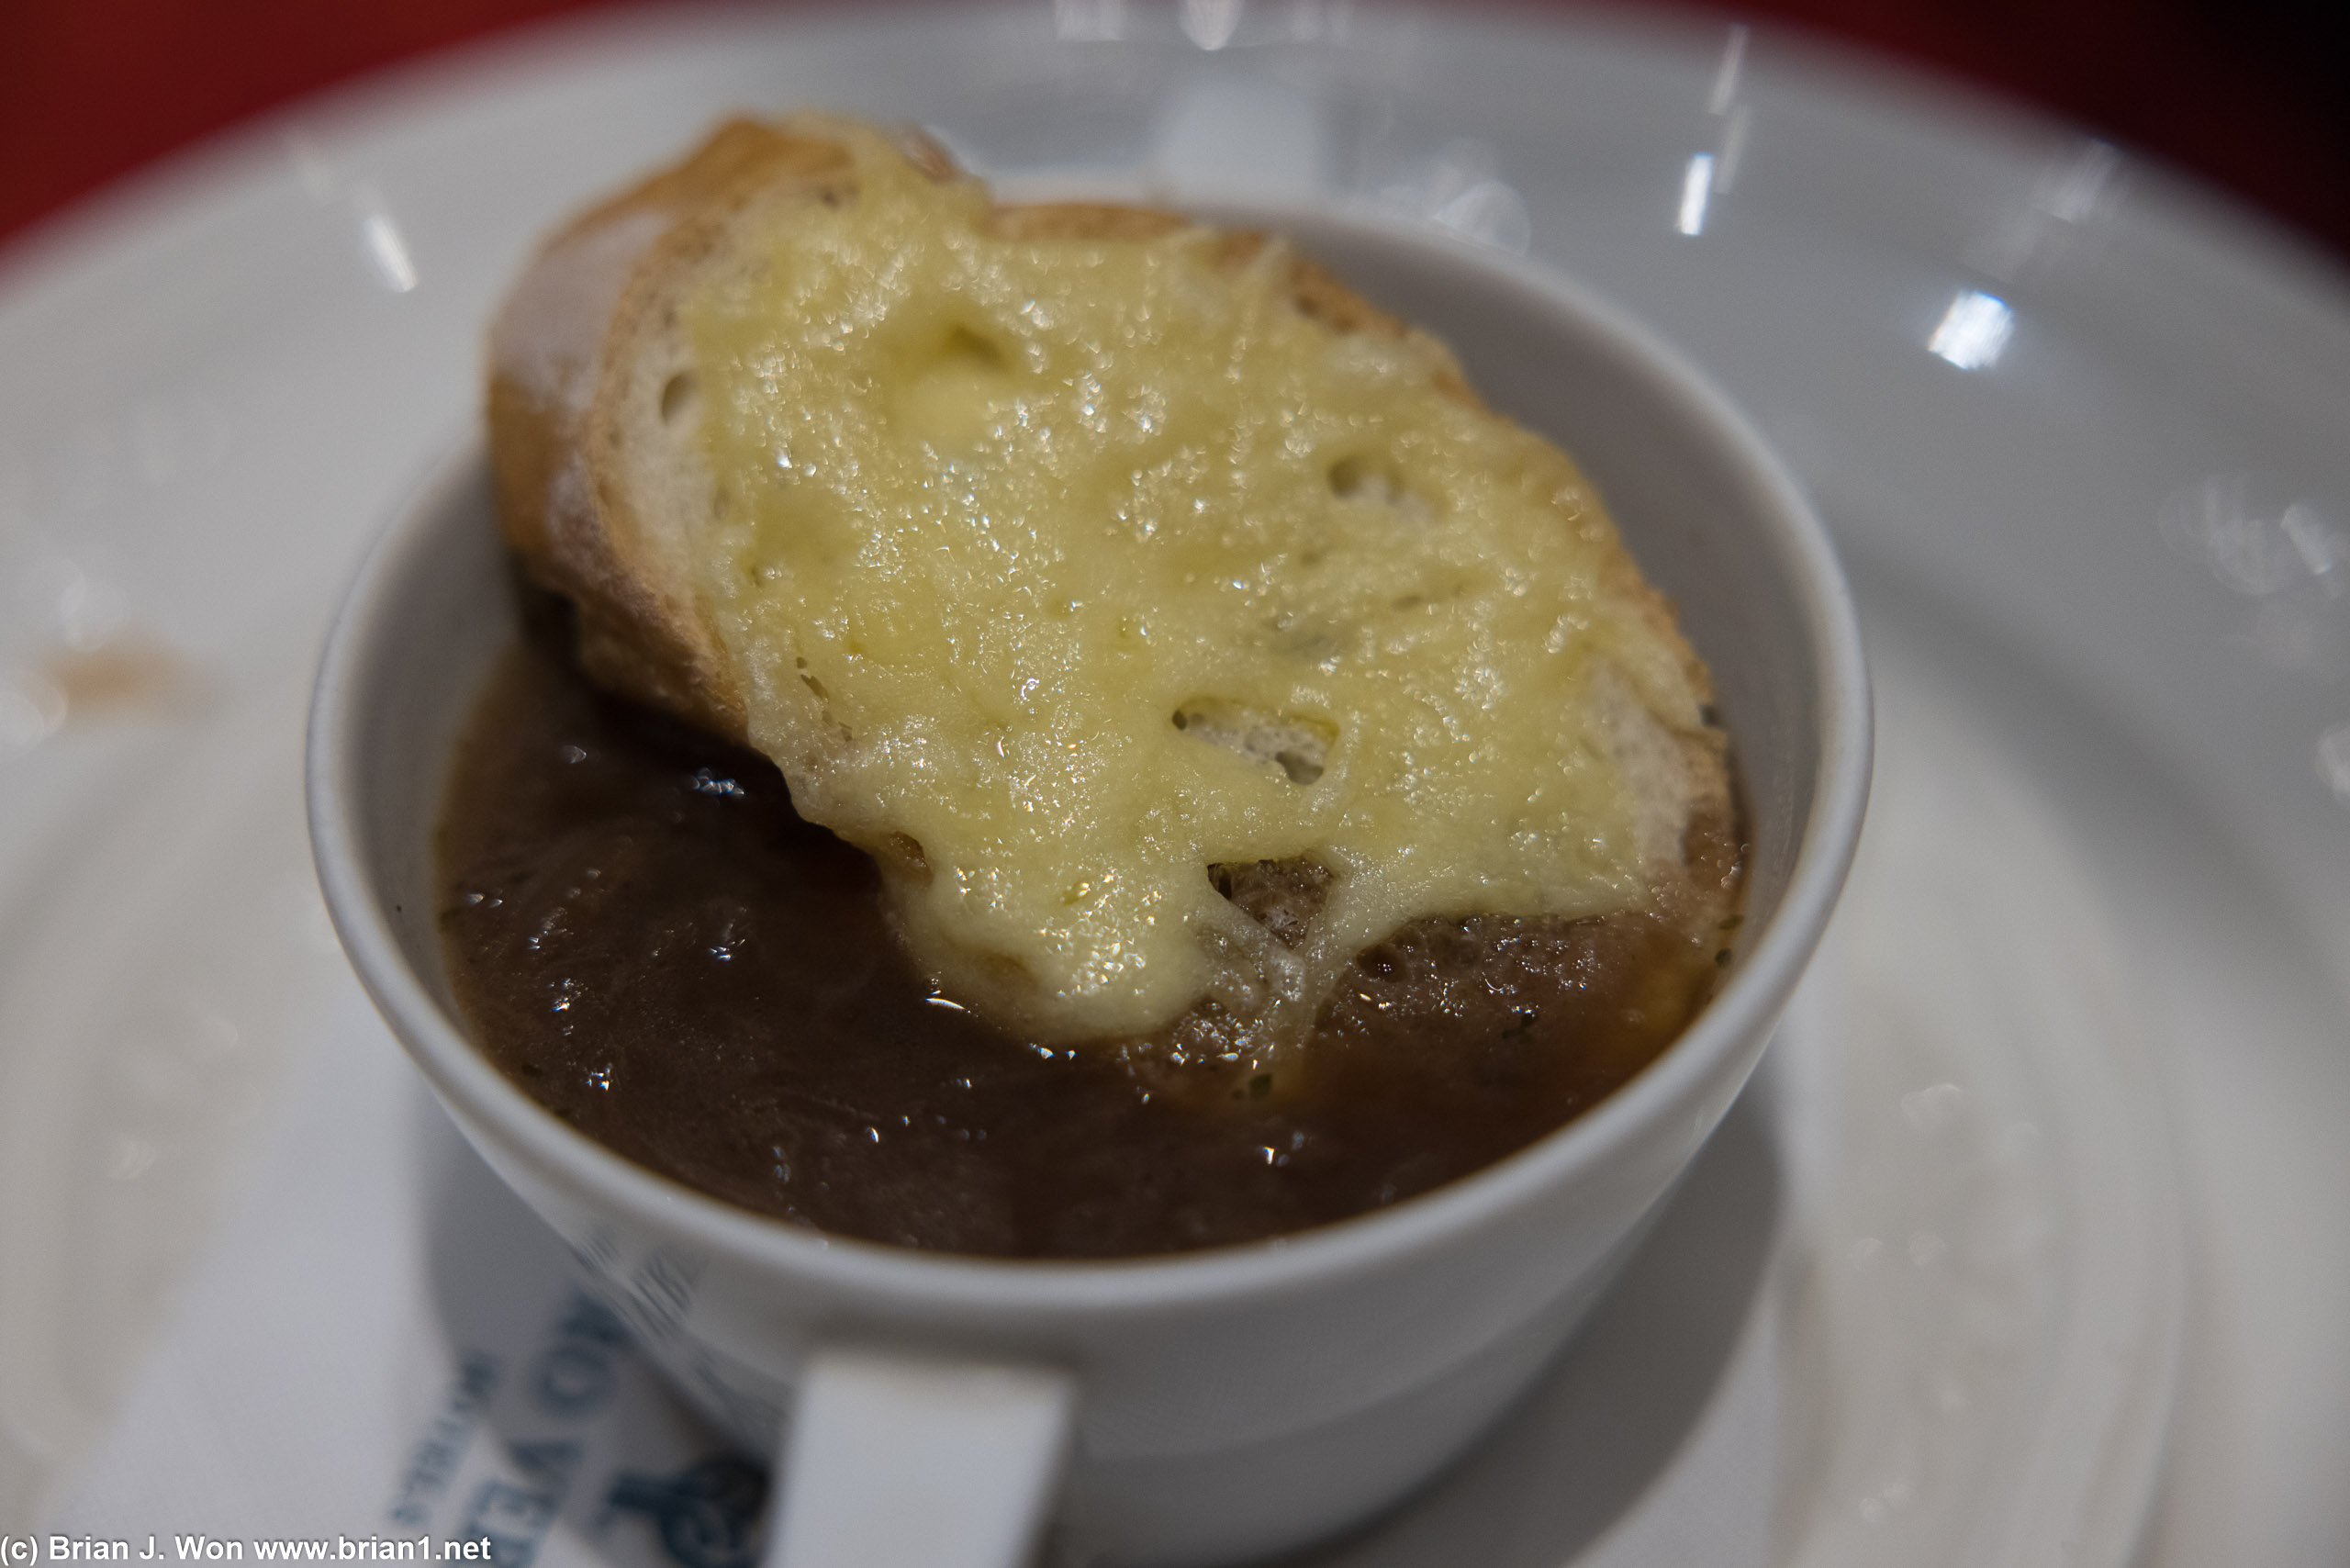 French onion soup wasn't bad.